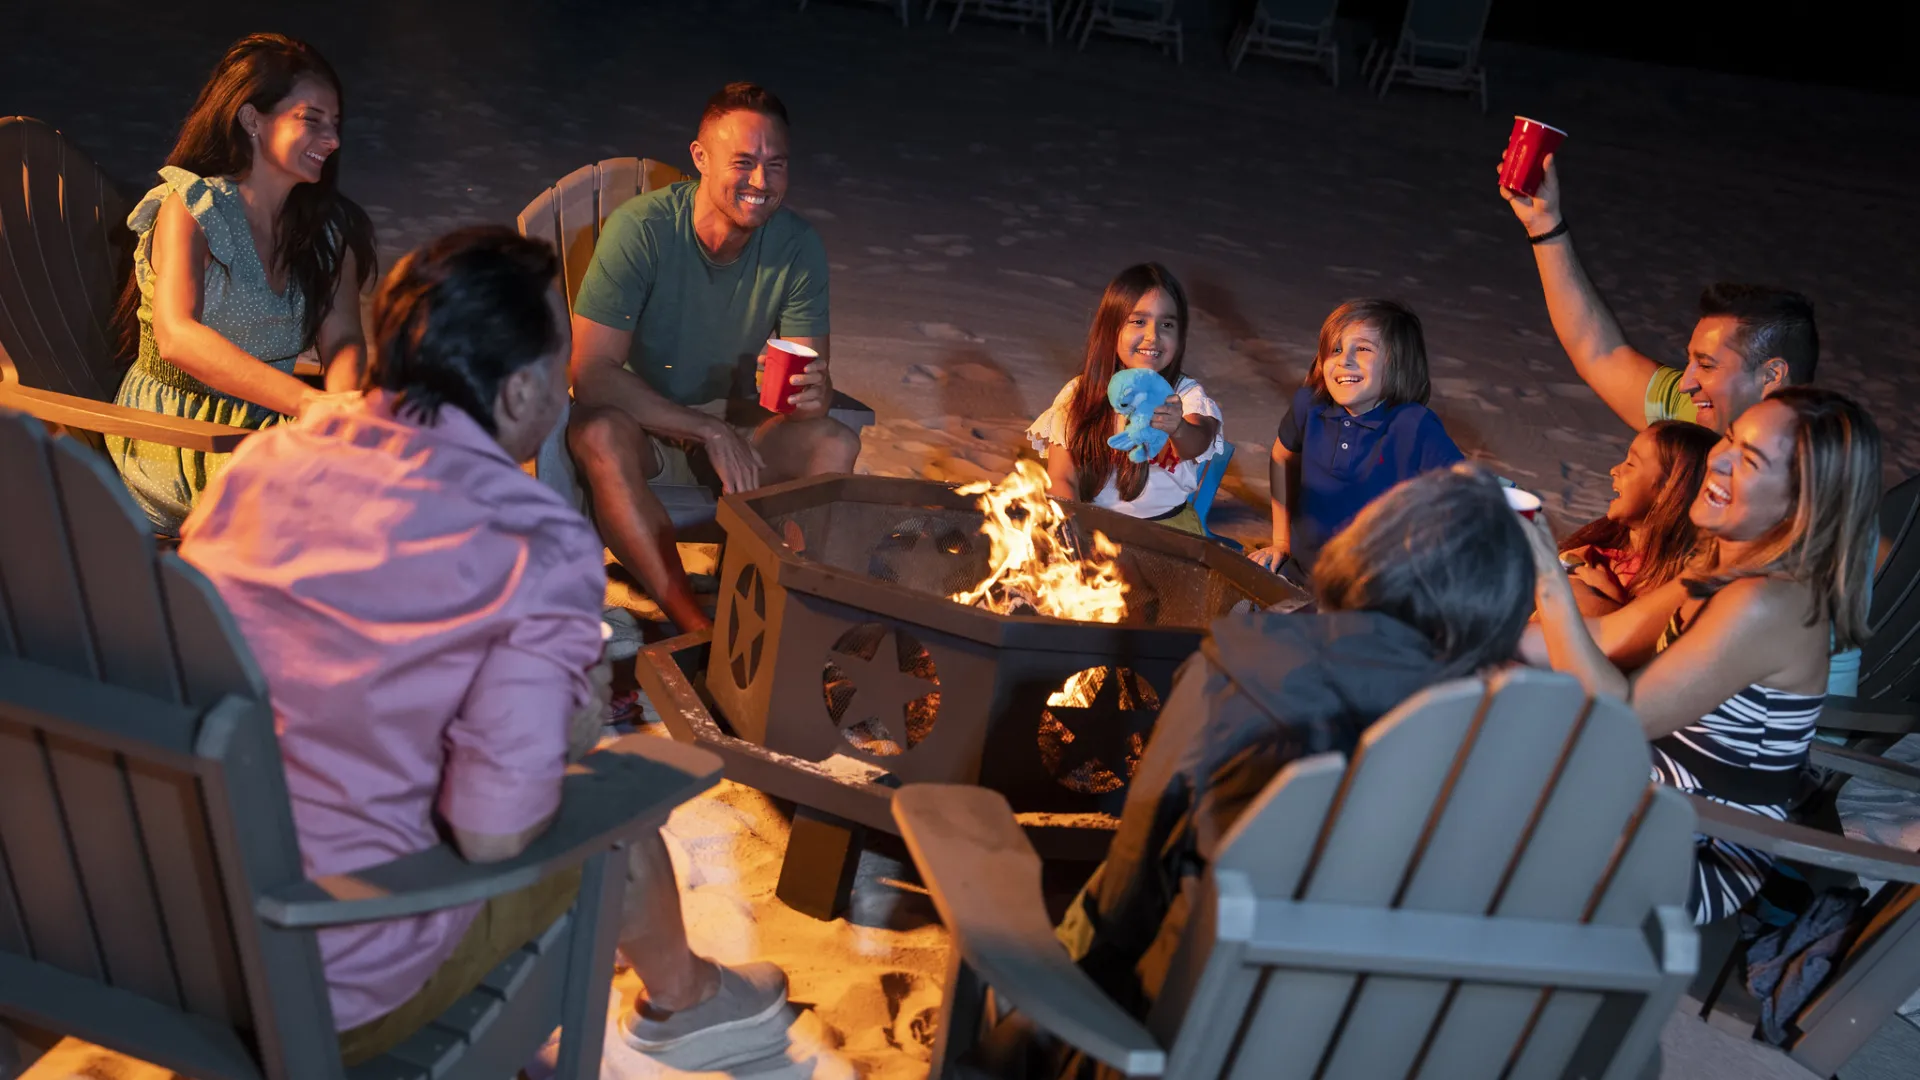 Family and Friends enjoying evening bonfire together 